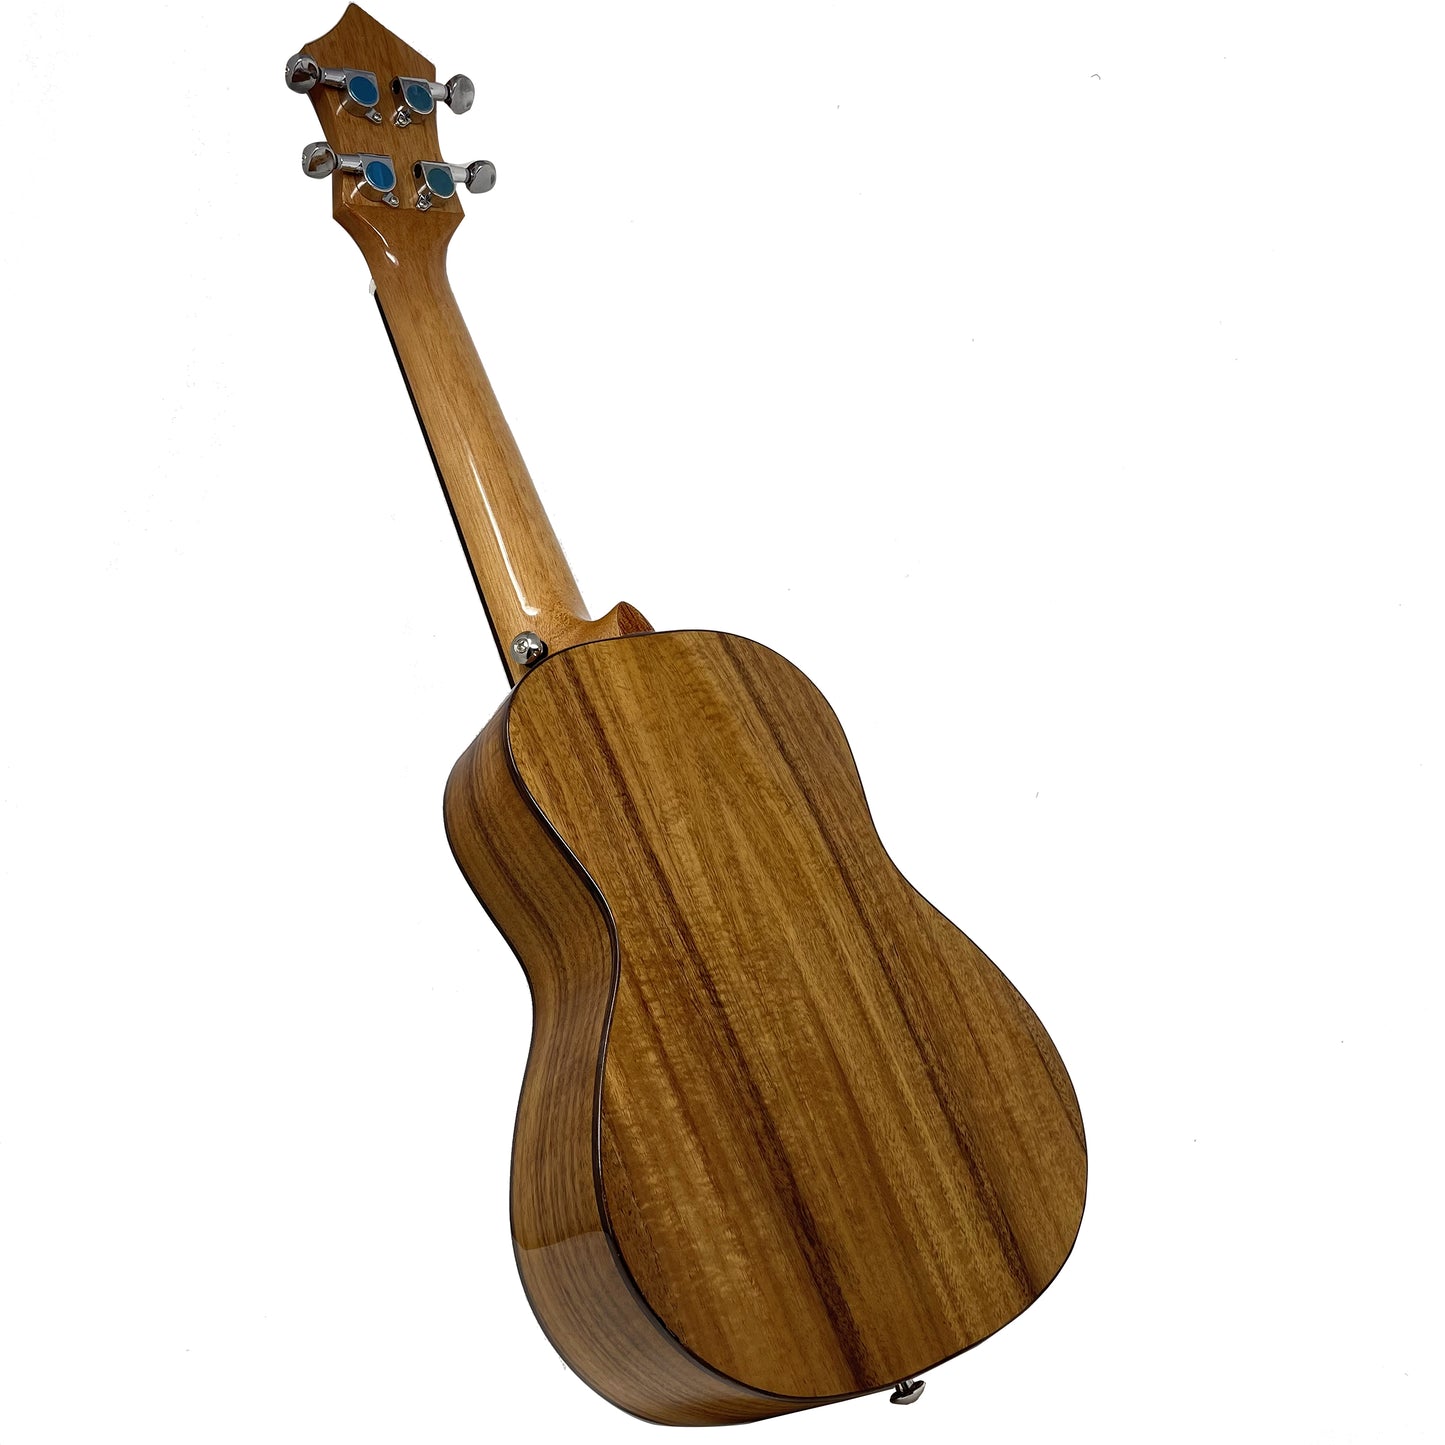 Kalena Concert Ukulele Solid Acacia Top Turtle Abalone Shell inlay high gloss Complete Set: Strings, Picks, Strap, Digital Tuner, Padded Case, Starter Guide